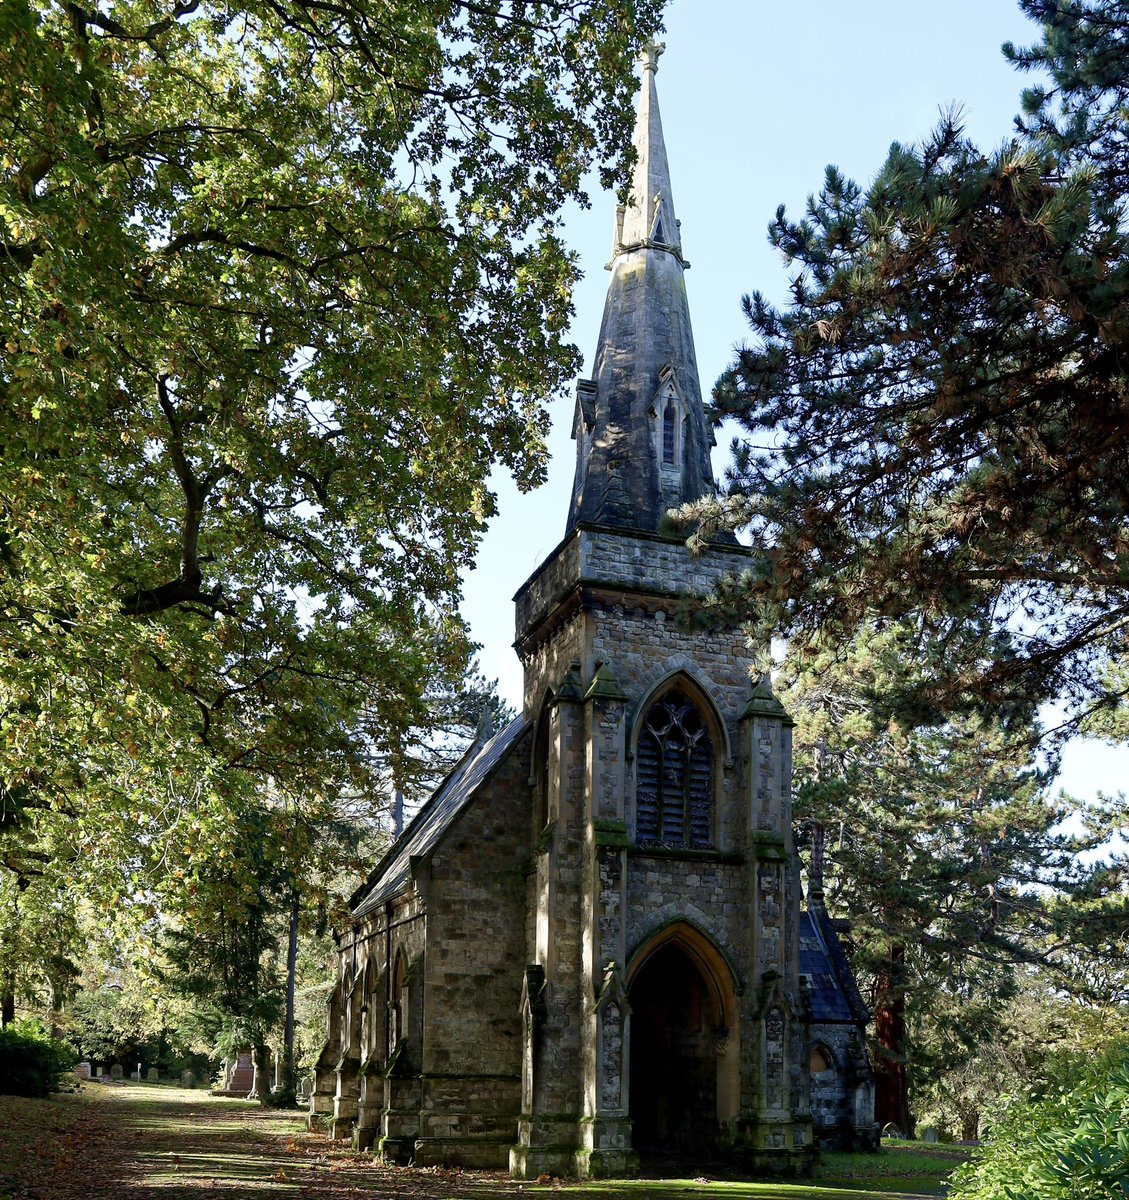 We’re delighted to be supporting @EnfieldCouncil on their new project! Lavender Hill: Chapel & Community has been generously funded by @HeritageFundUK @ThePilgrimTrust & @EnfieldSoc. We’ll be seeking to find a sensitive reuse for this Grade II listed Cemetery #Chapel 💜 #Heritage